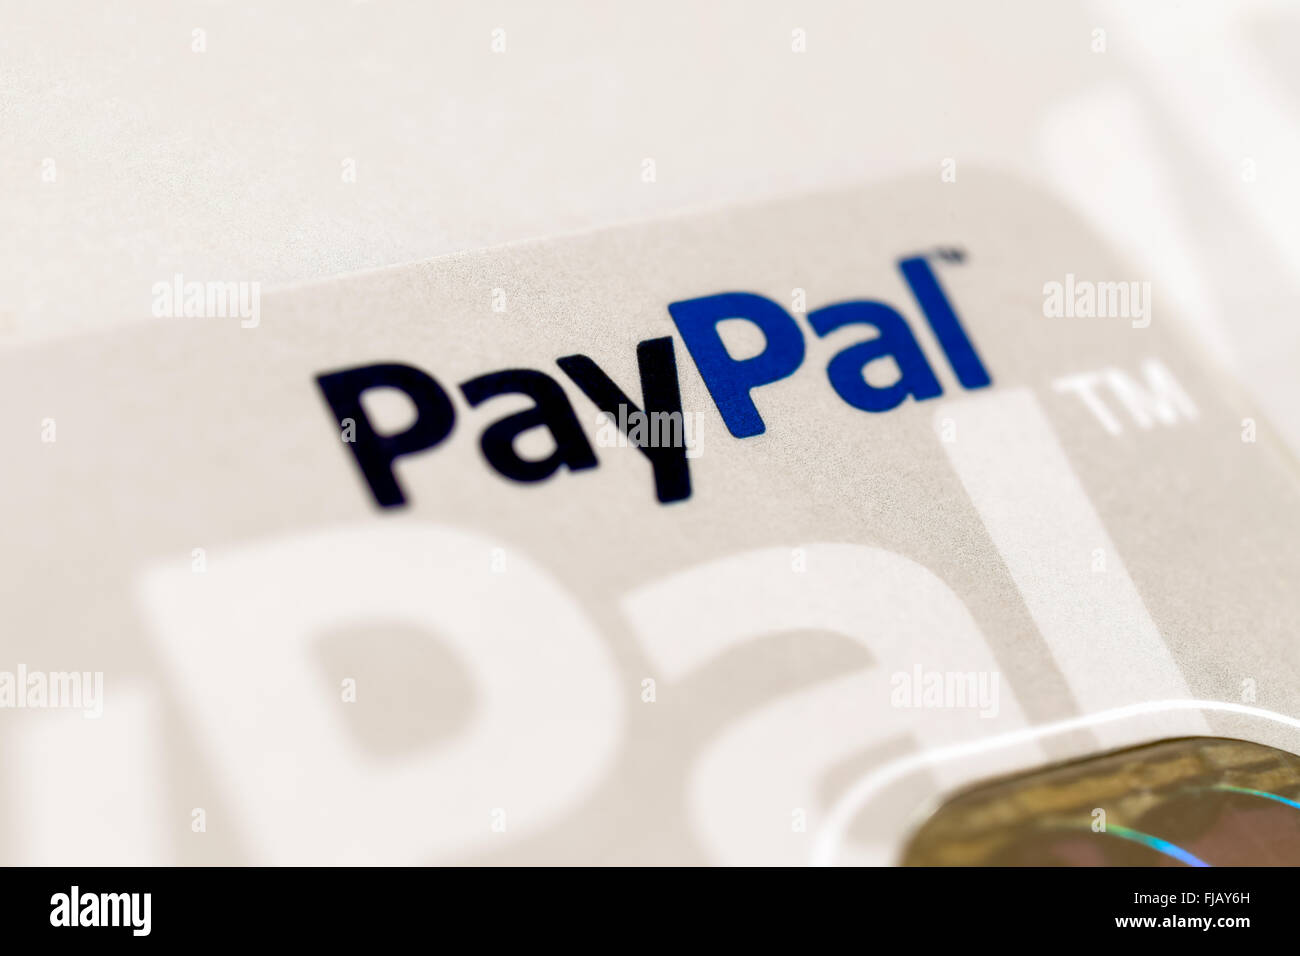 Paypal logo on a credit card. Paypal is a popular commerce platform for  accepting and sending money. Stock Photo